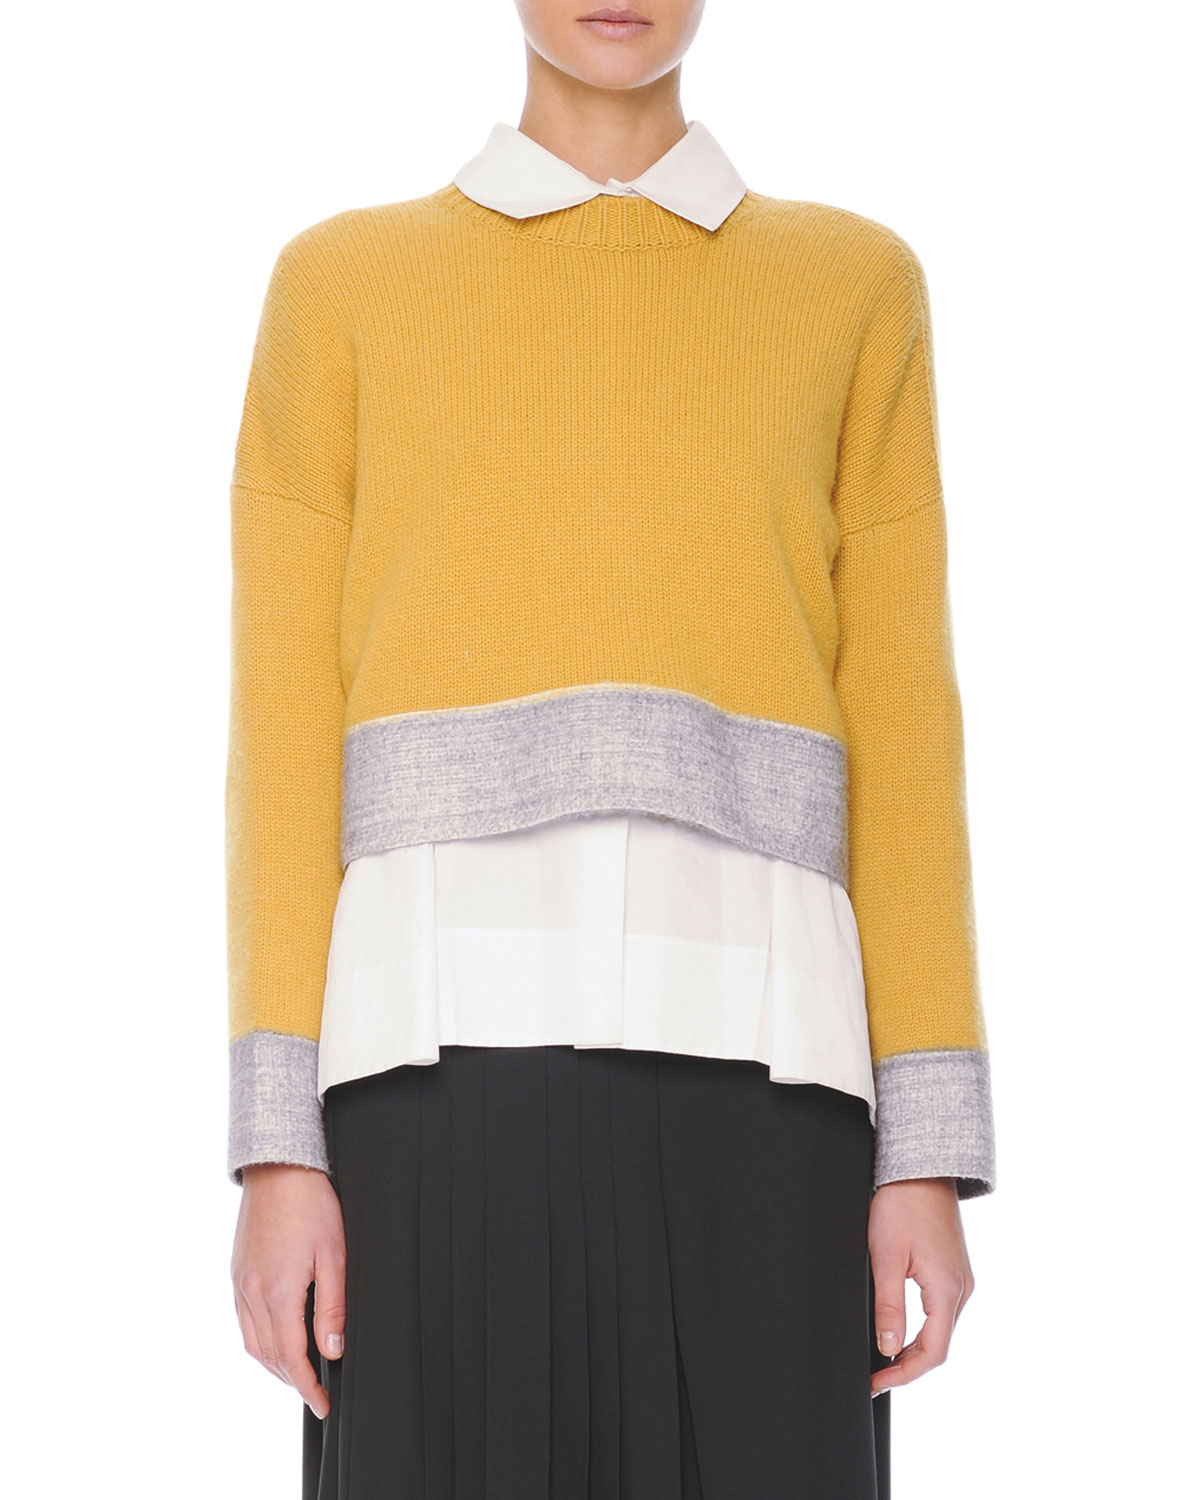 Lyst - Marni Felt-trim Button-back Knit Cropped Sweater in Yellow